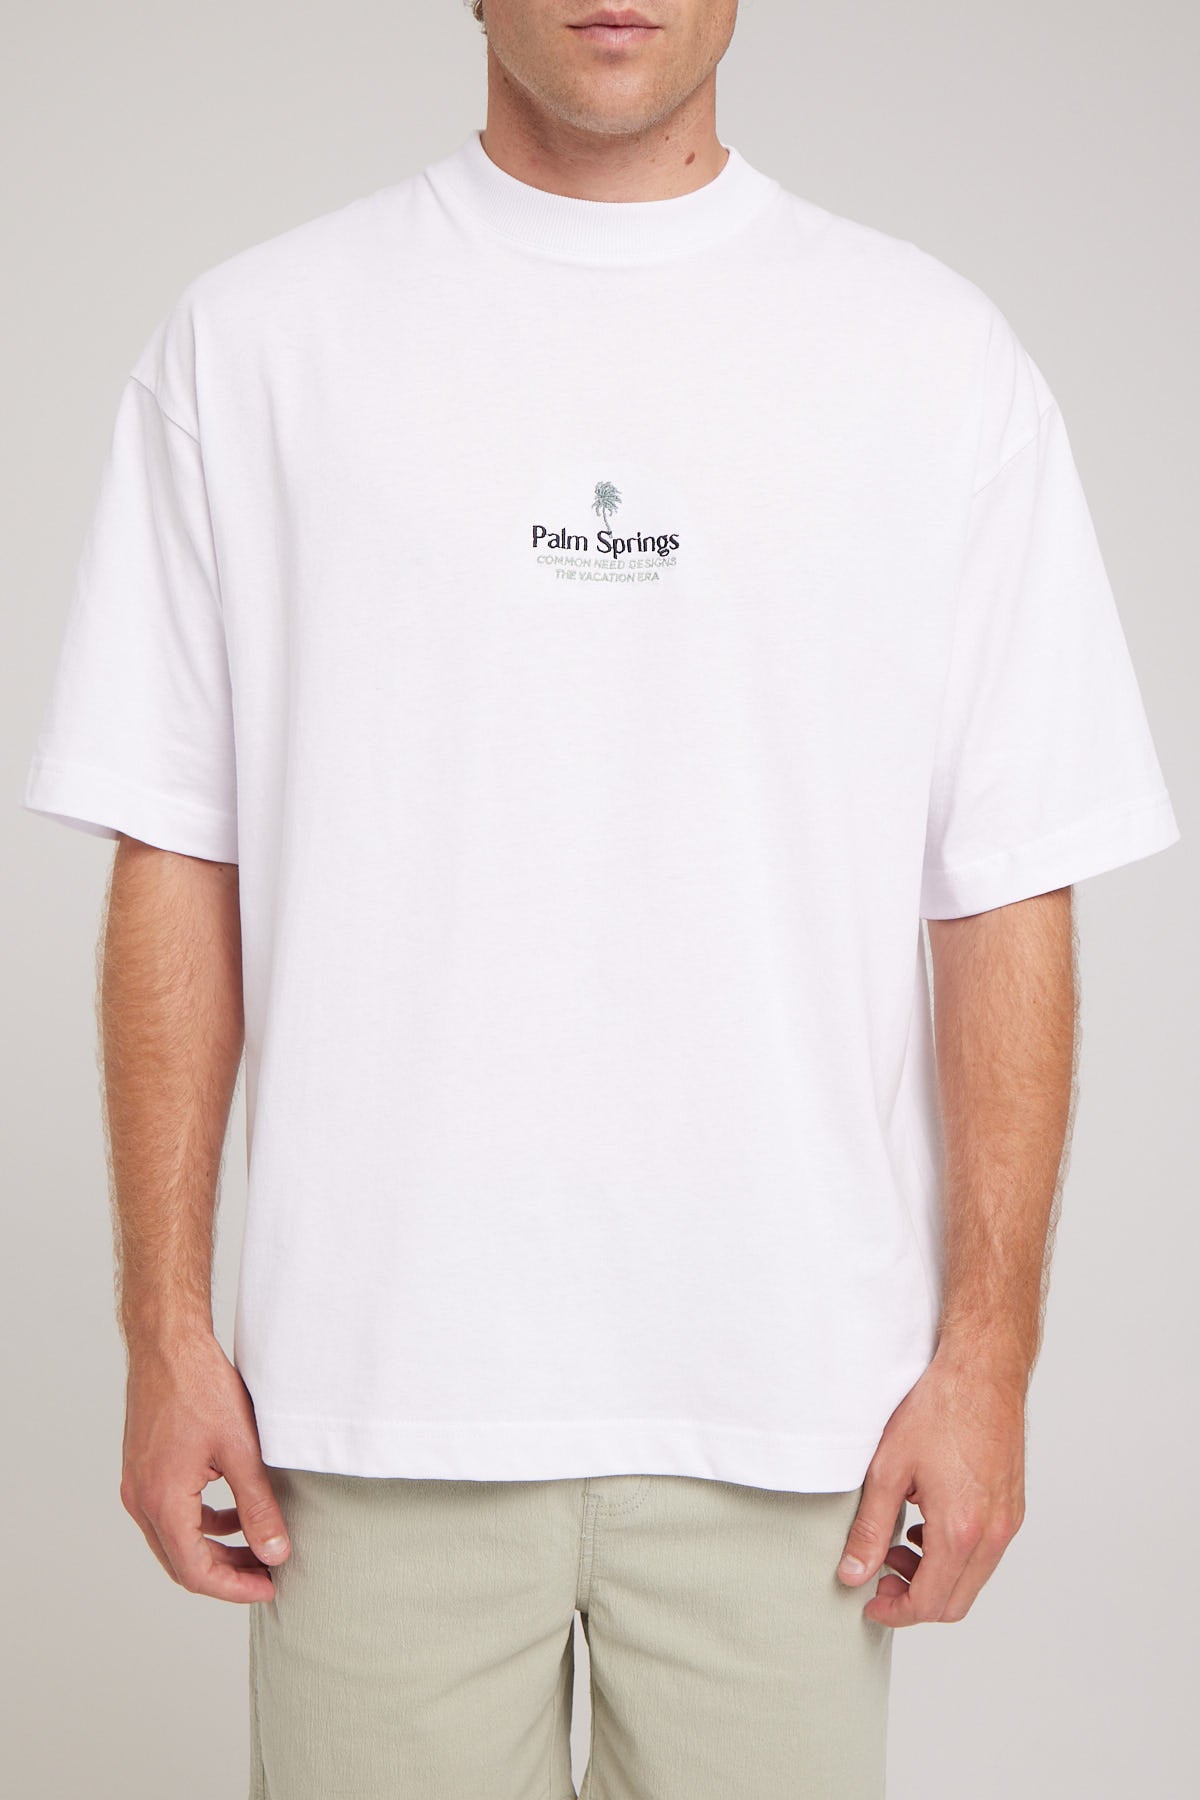 Common Need Palm Springs Easy Tee White – Universal Store